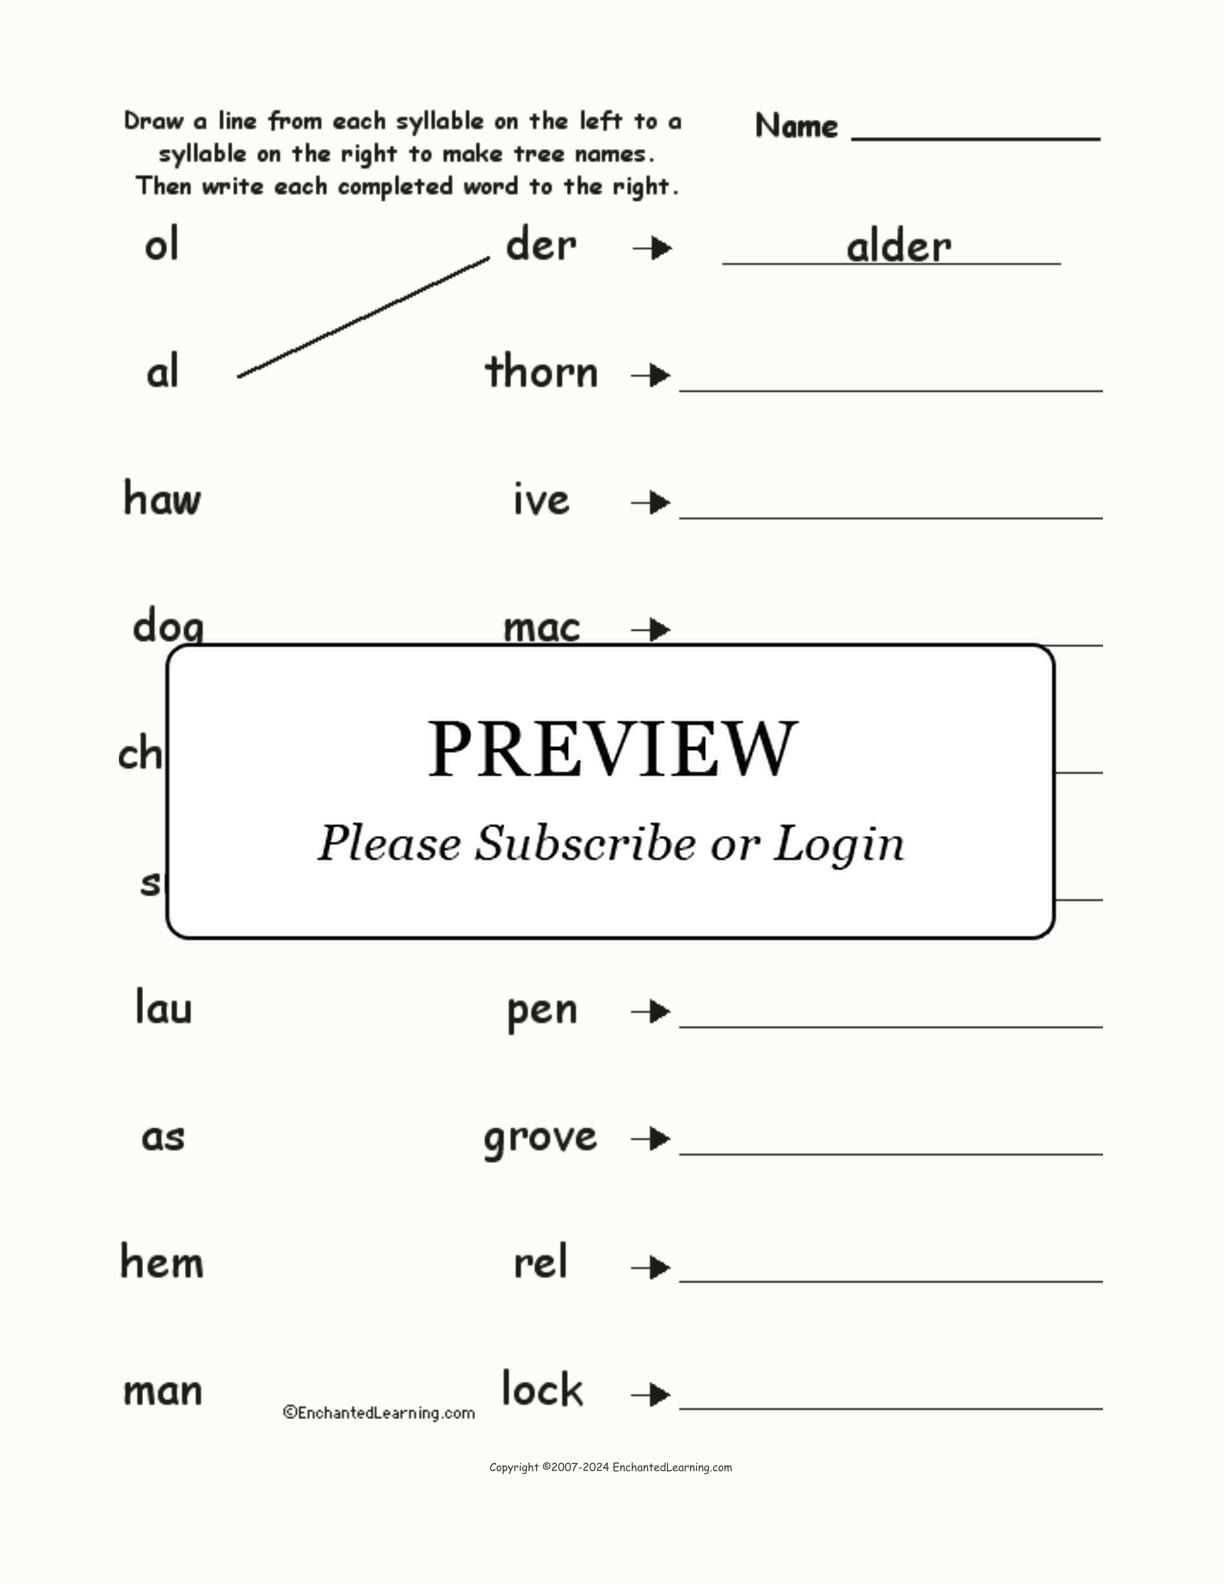 Match the Syllables: Tree Words #2 interactive worksheet page 1